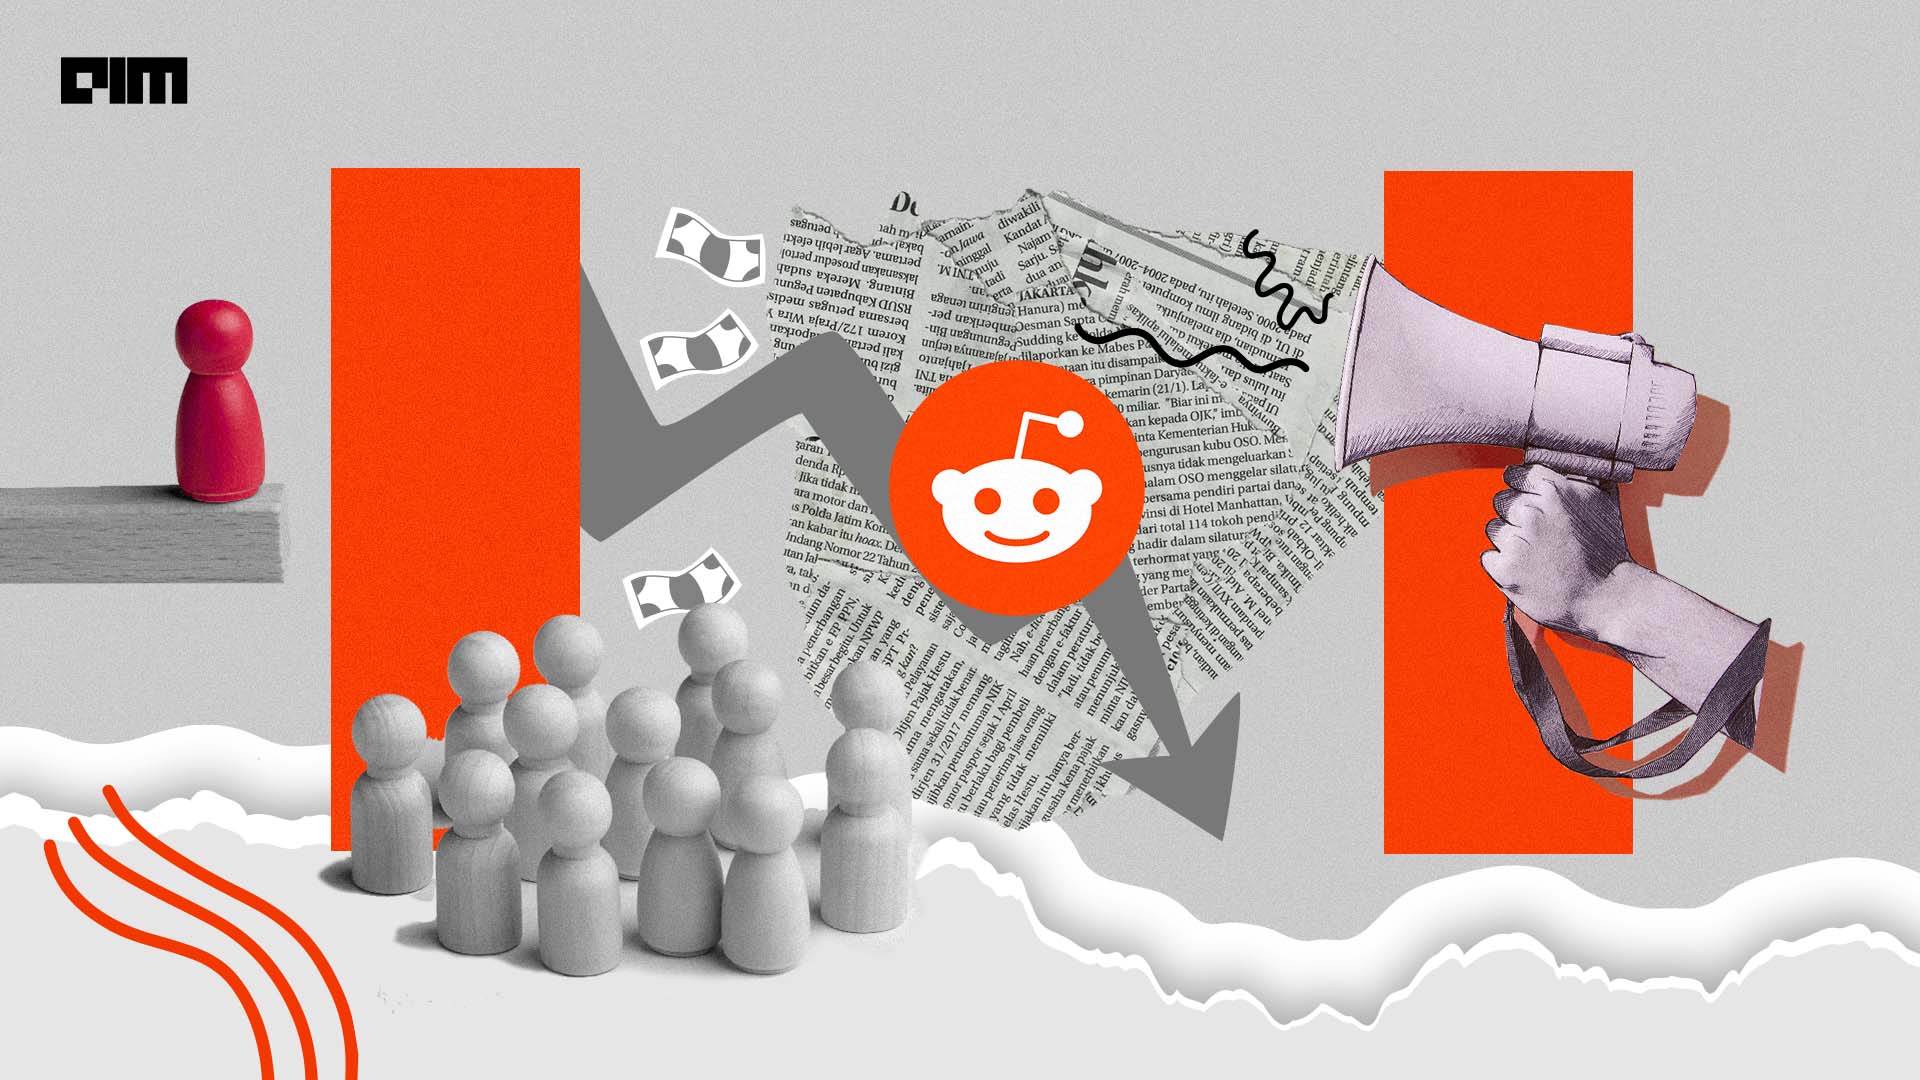 Despite widespread protest, Reddit CEO says company is 'not negotiating' on  3rd-party app charges